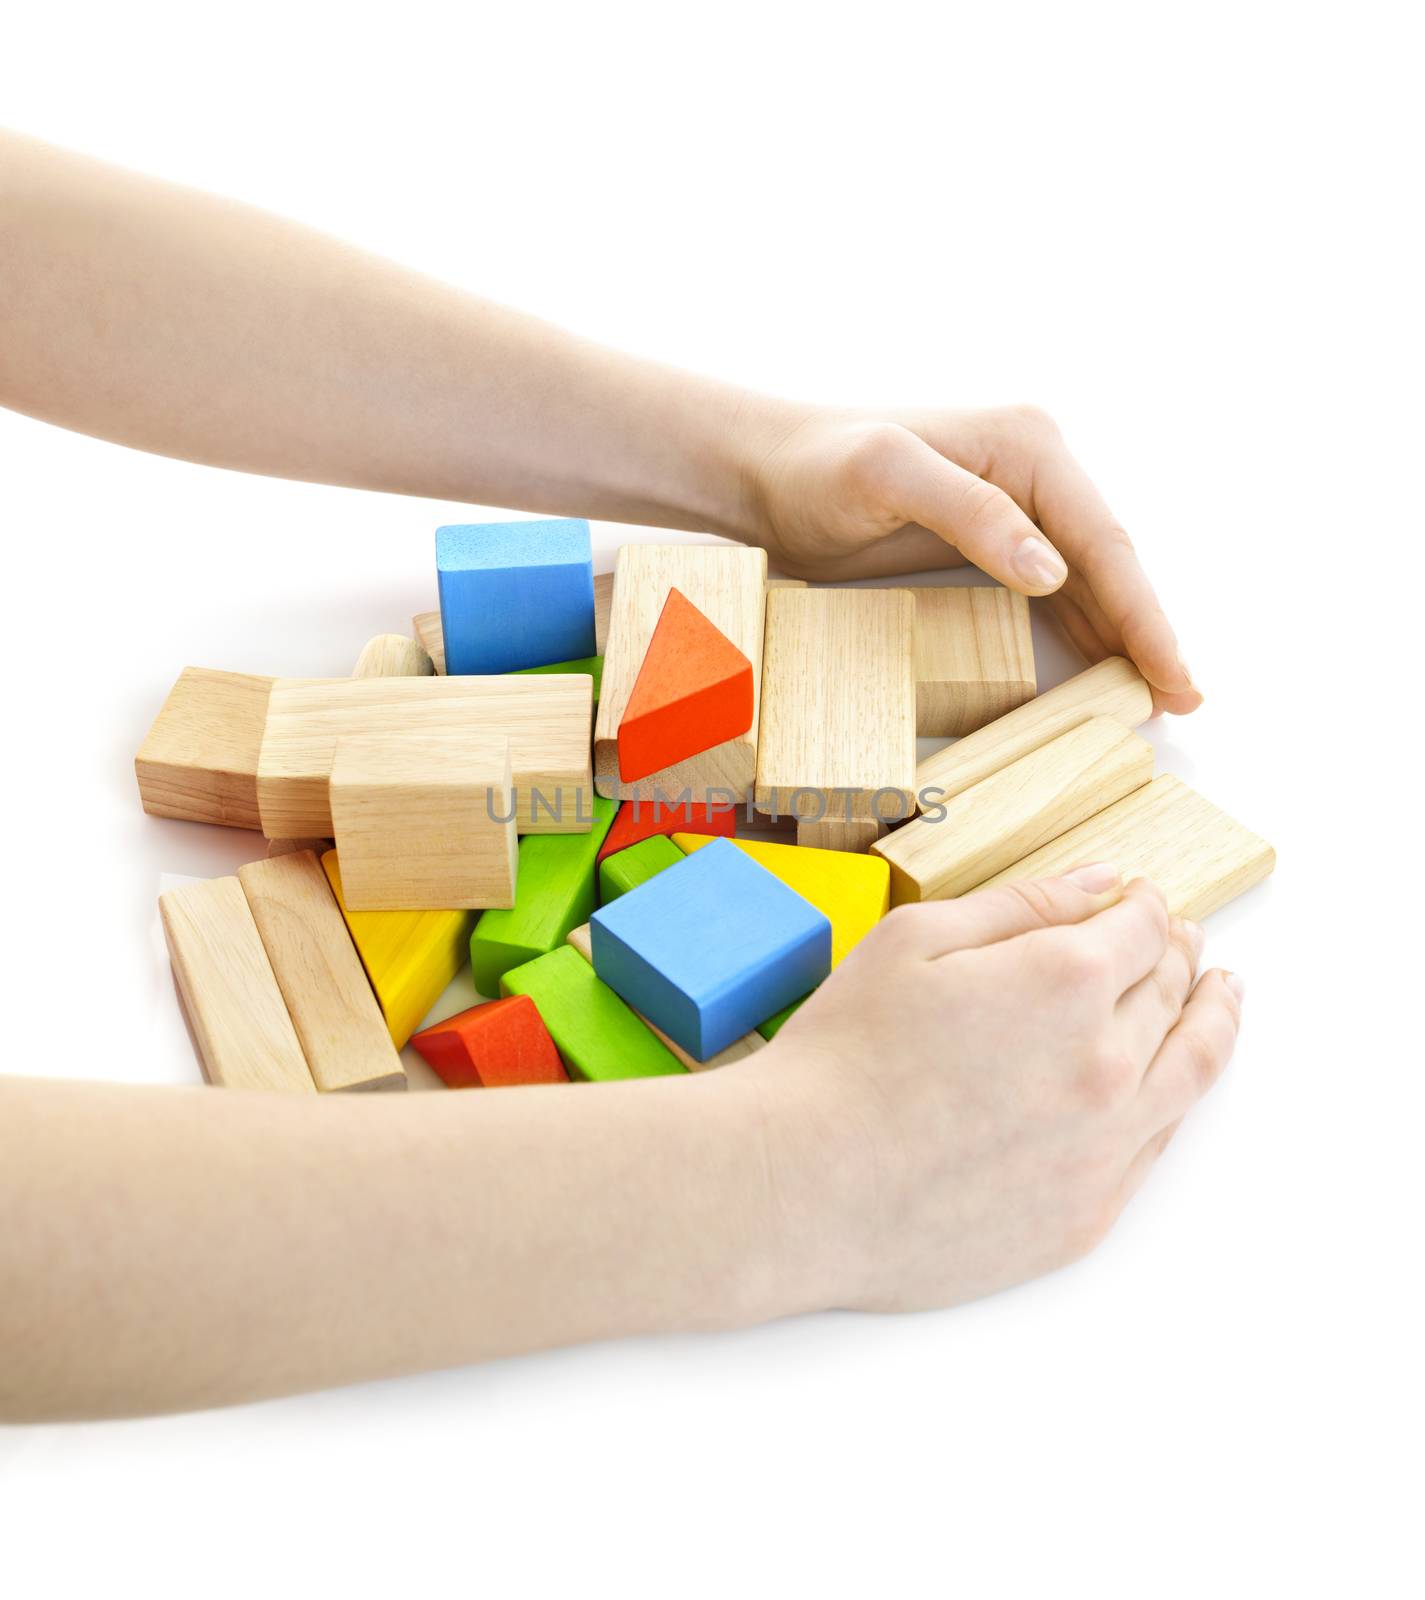 Hands gathering pile of wooden block toys isolated on white